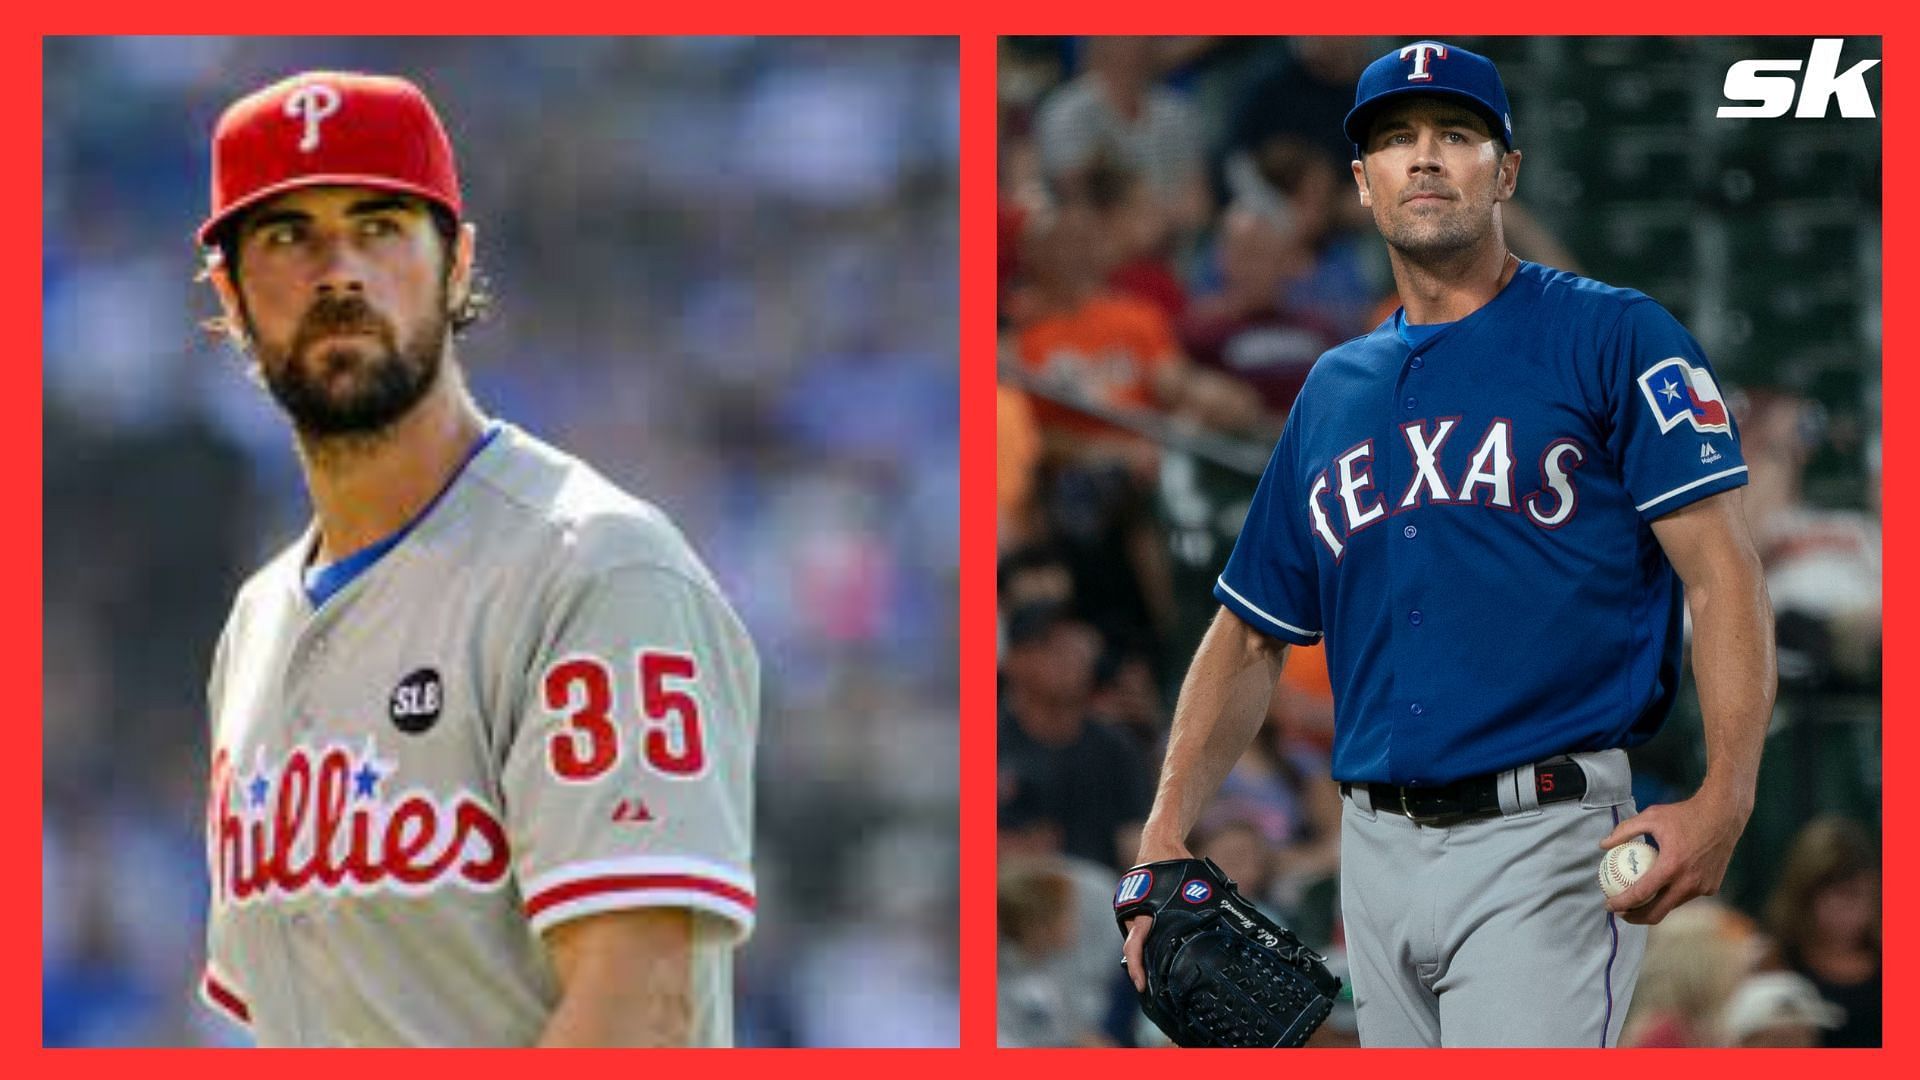 Cole Hamels once intentionally hit Bryce Harper to command respect during  his rookie season